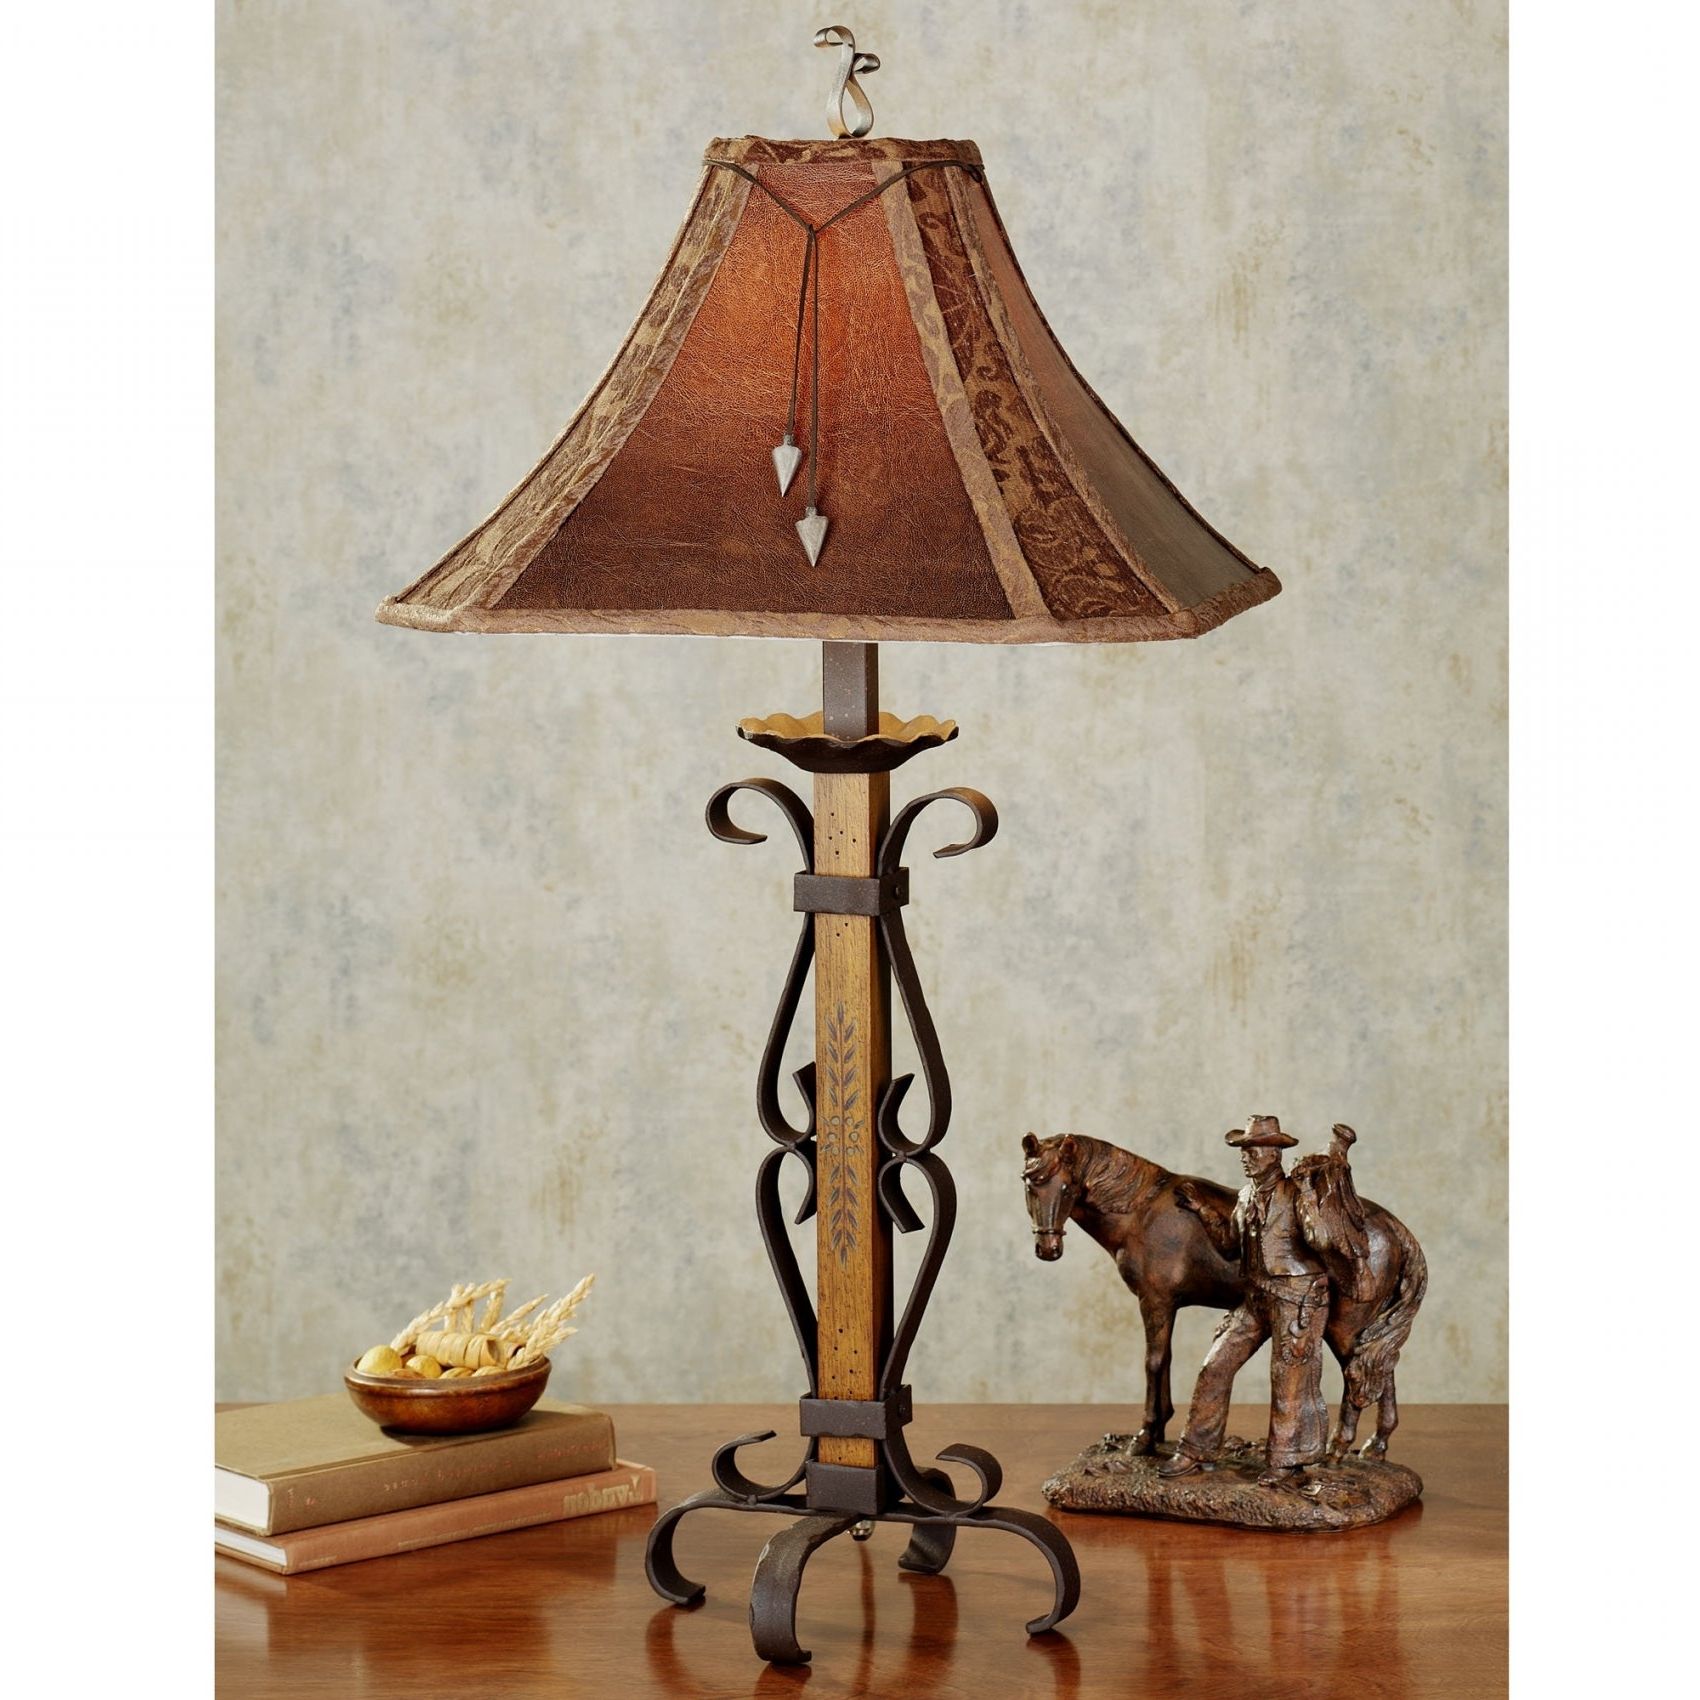 Widely Used Western Table Lamps For Living Room Within Western Table Lamps Living Room (View 1 of 15)